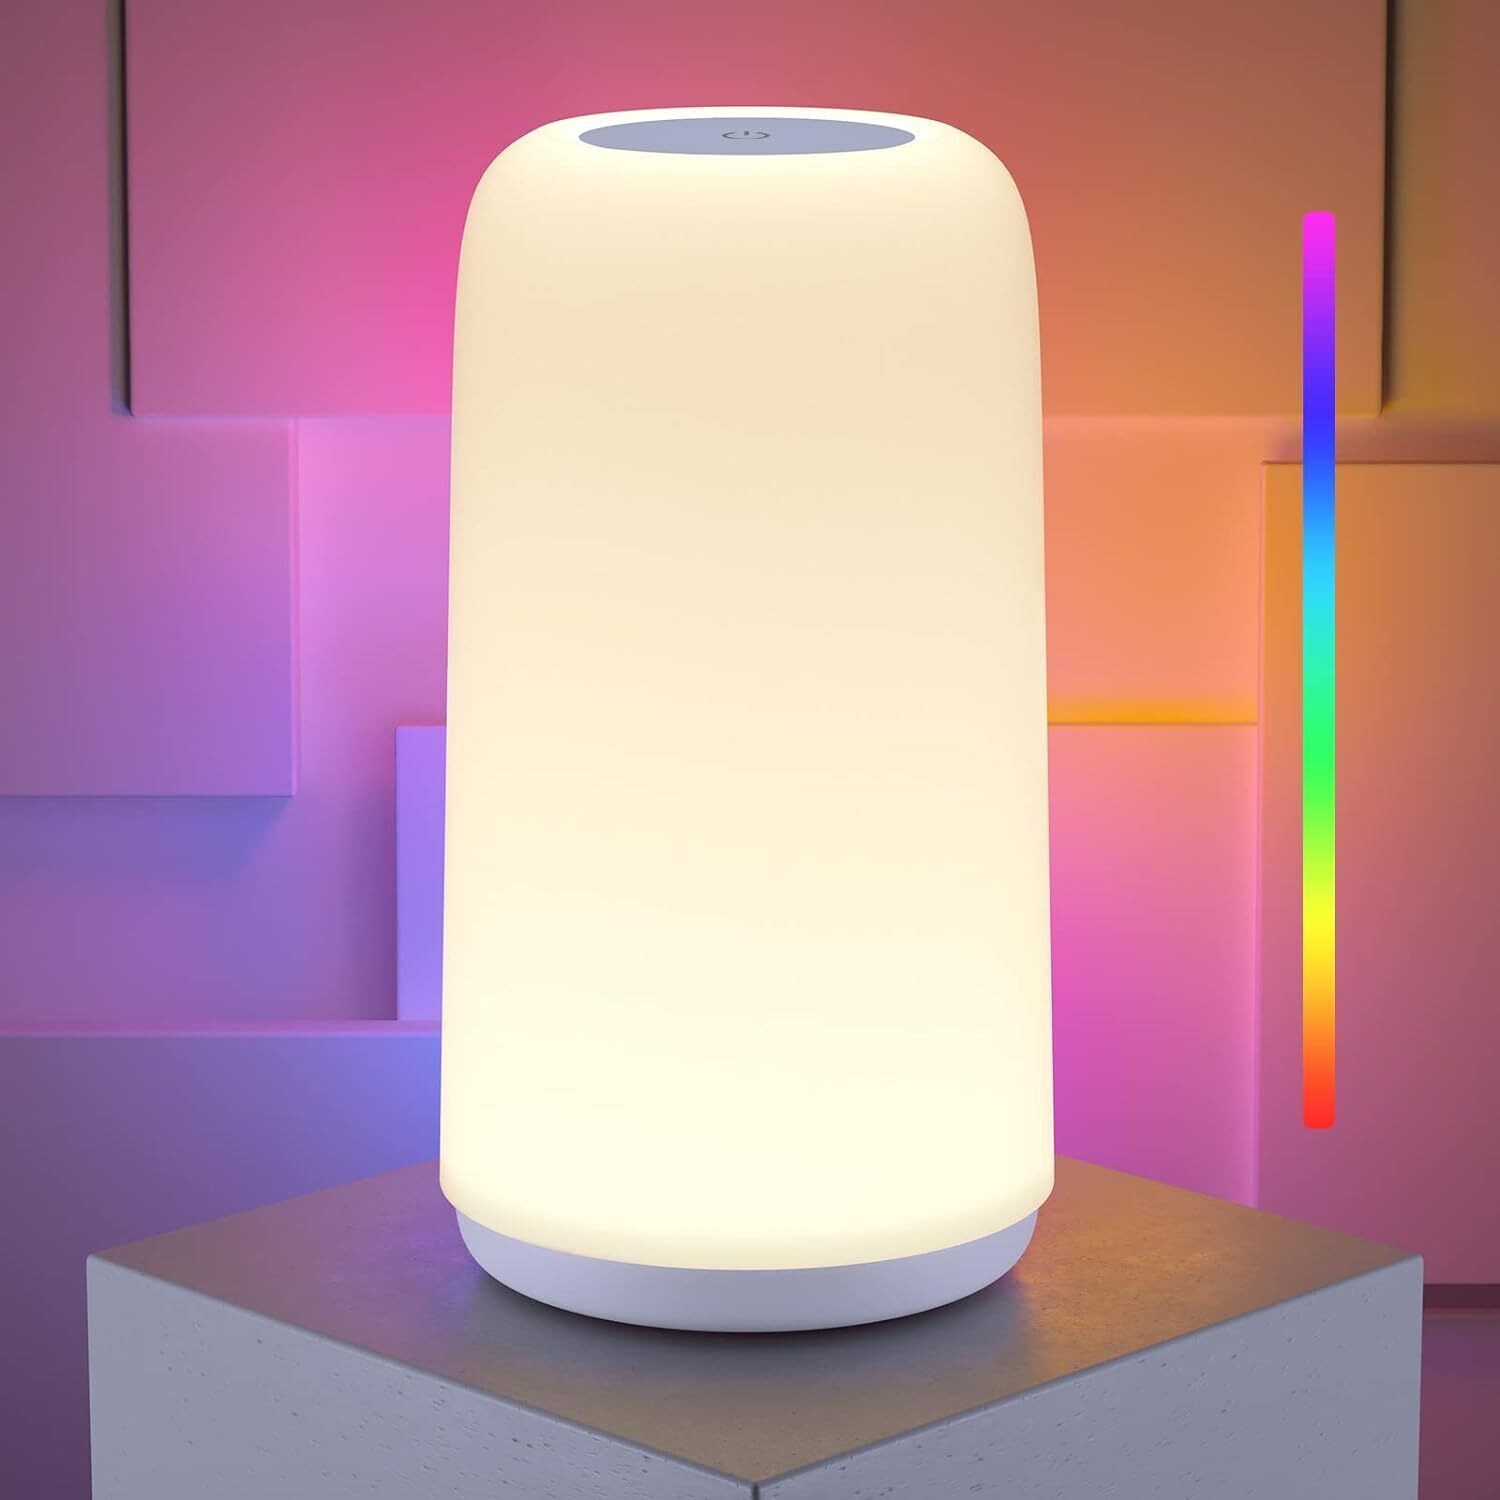 ROOTRO Touch Bedside Table Lamp, [Sleek Design & RGB Mode] 3 Way White 